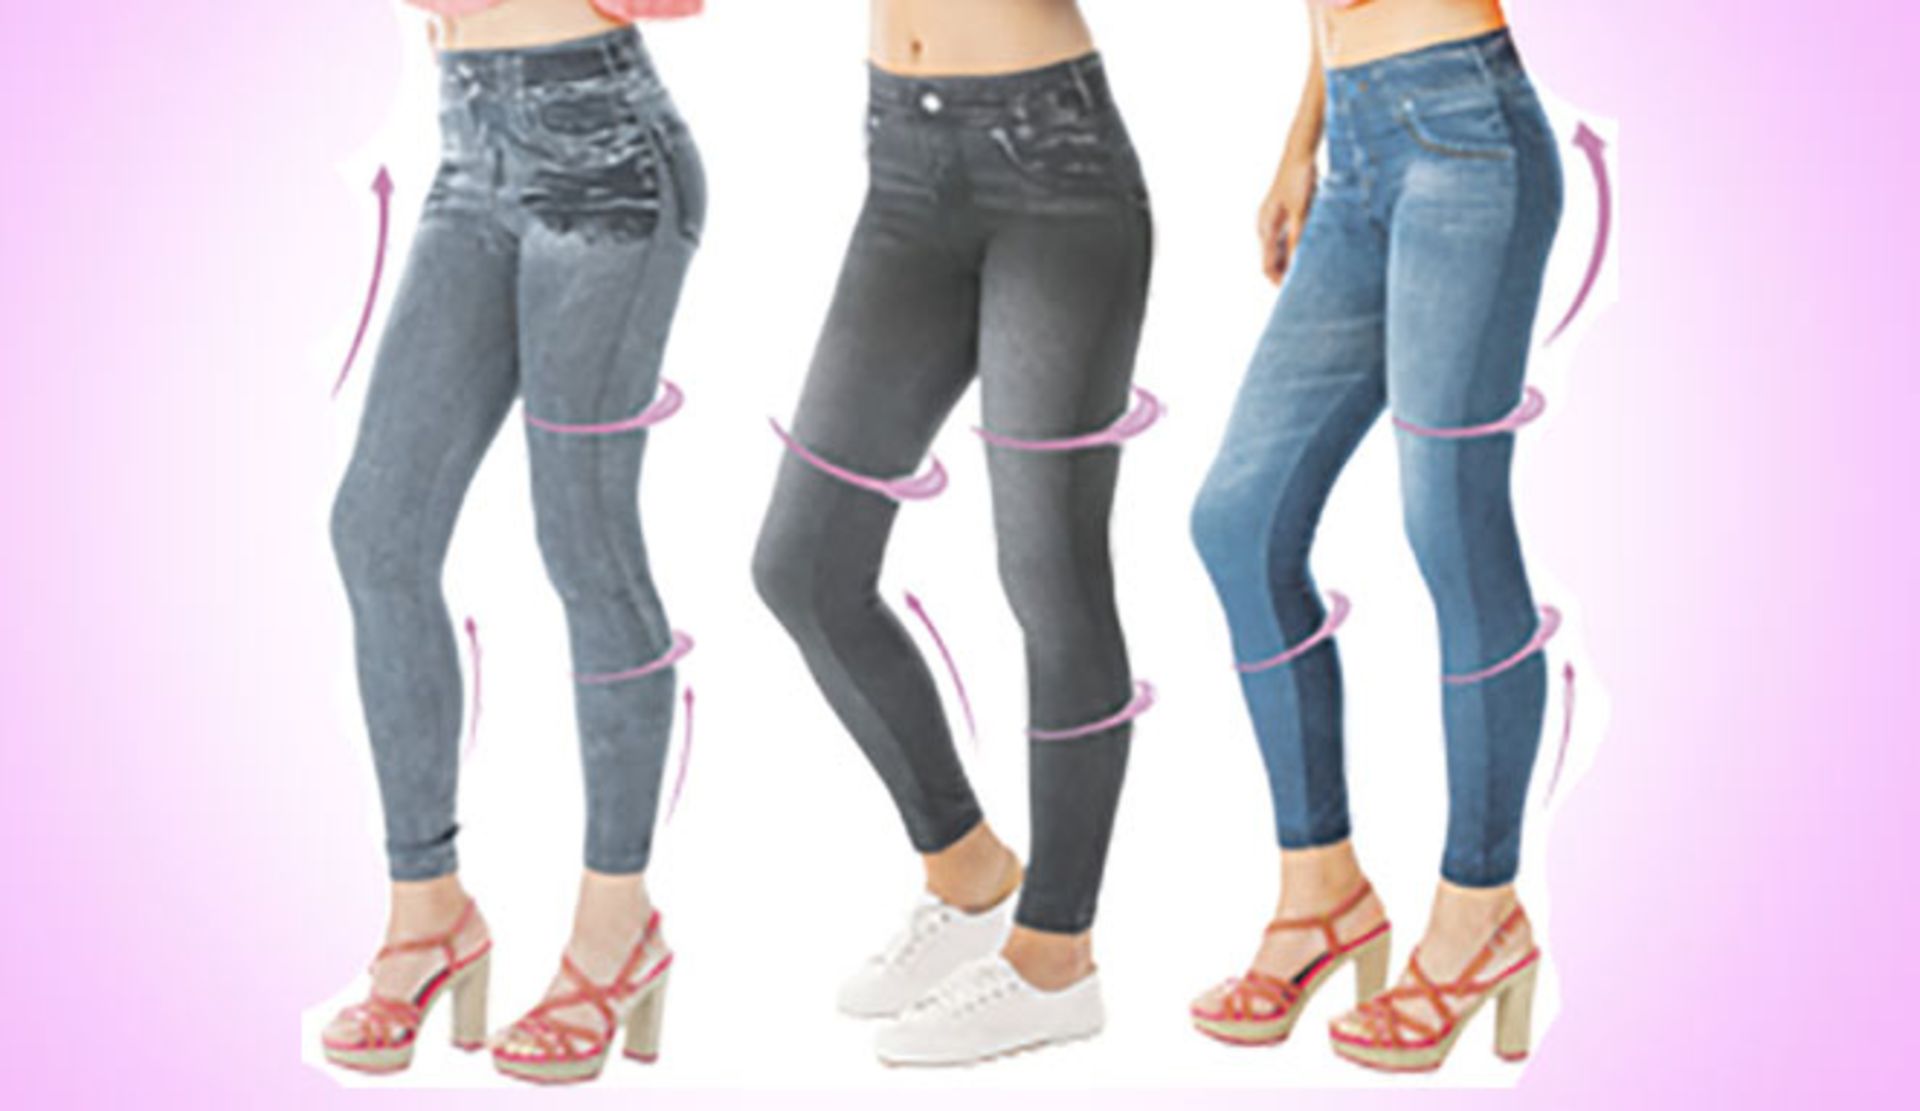 V *TRADE QTY* Brand New A Lot Of Three Pairs Jeggings Size 14-16 ISP £19.99 (Qudos Direct) X 3